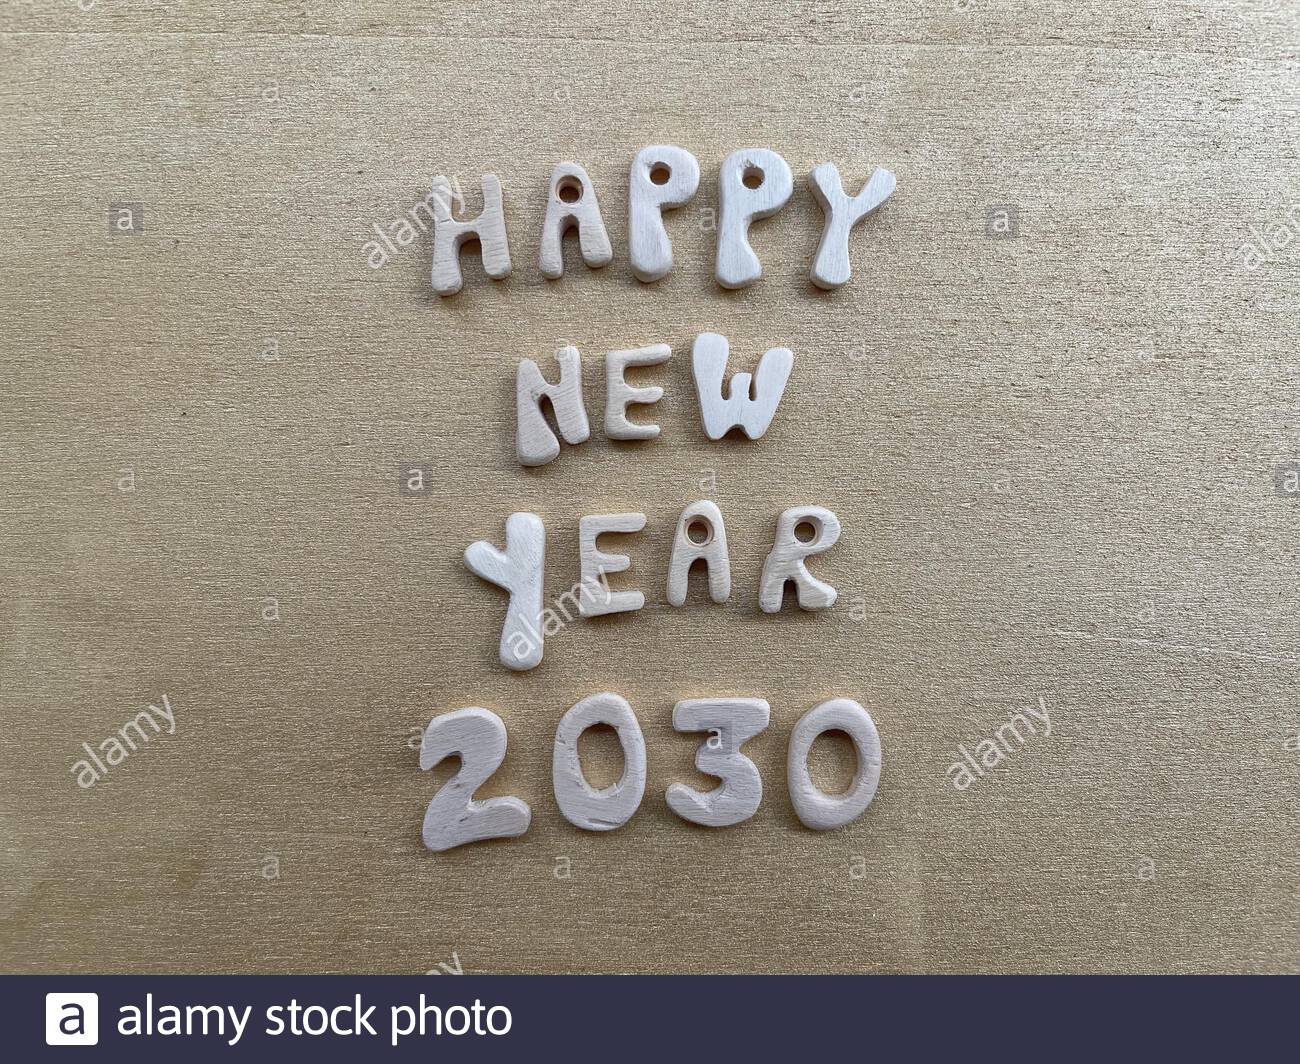 Happy New Year 2030 with wooden letters and numbers Stock Photo 1300x1064